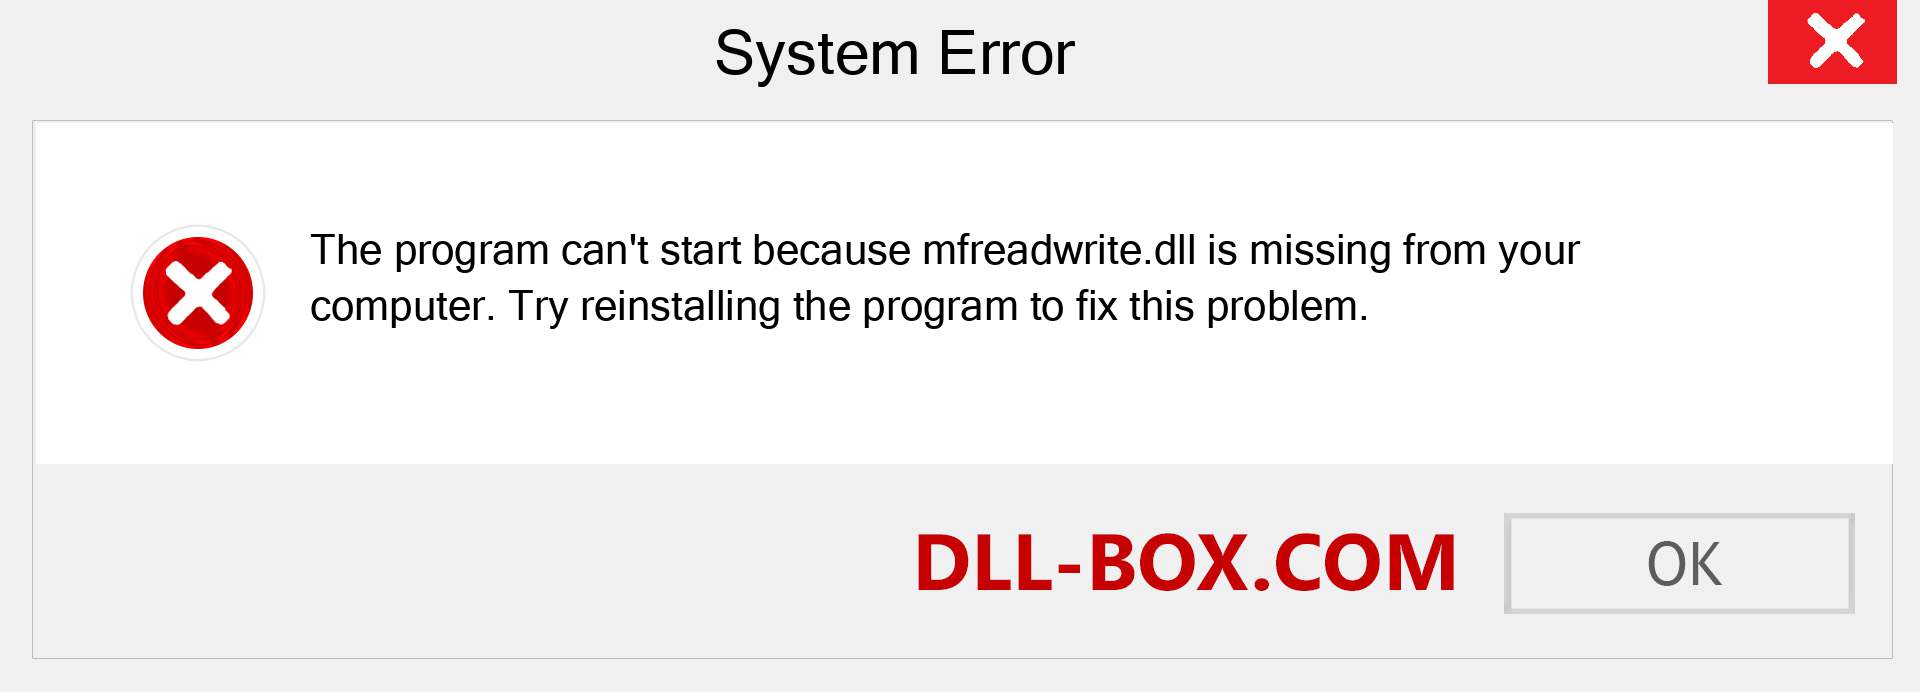  mfreadwrite.dll file is missing?. Download for Windows 7, 8, 10 - Fix  mfreadwrite dll Missing Error on Windows, photos, images